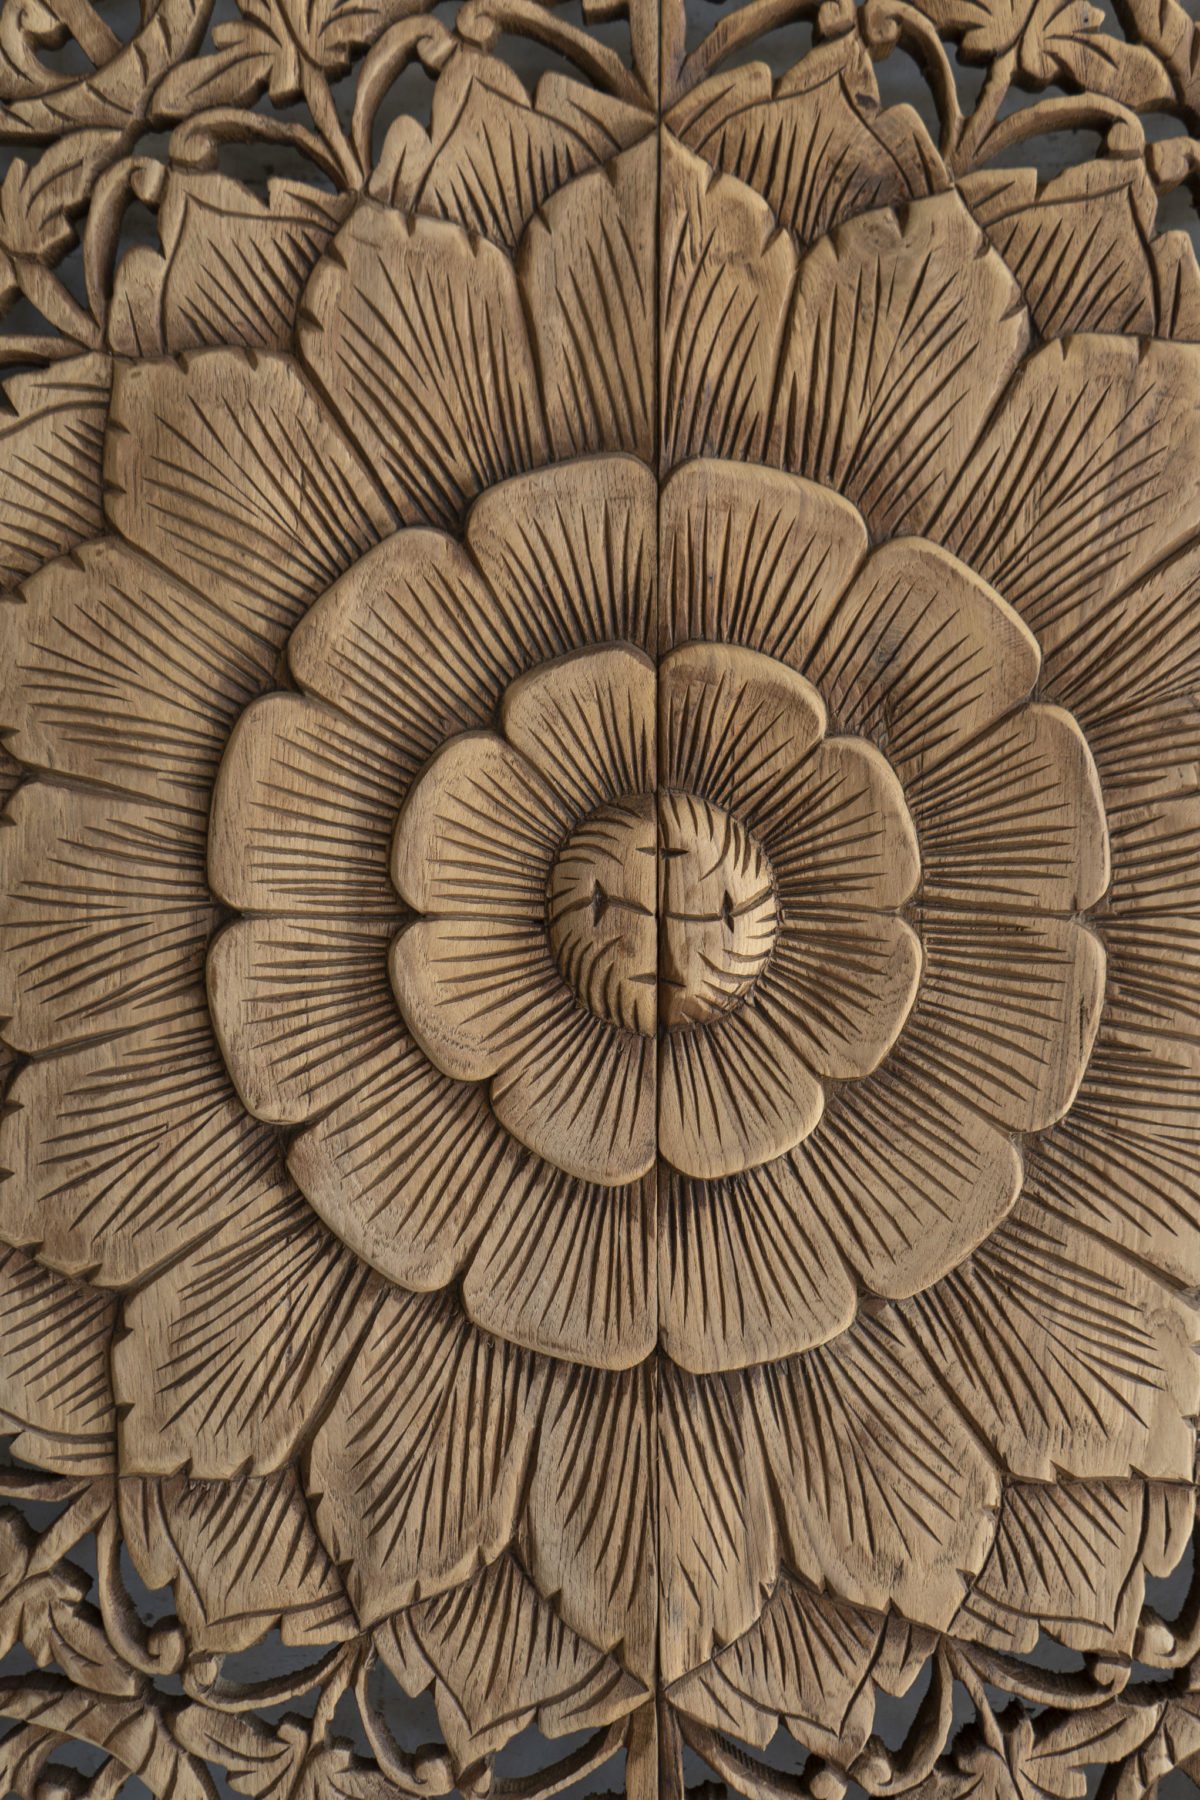 Blooming flower hand carved in wood